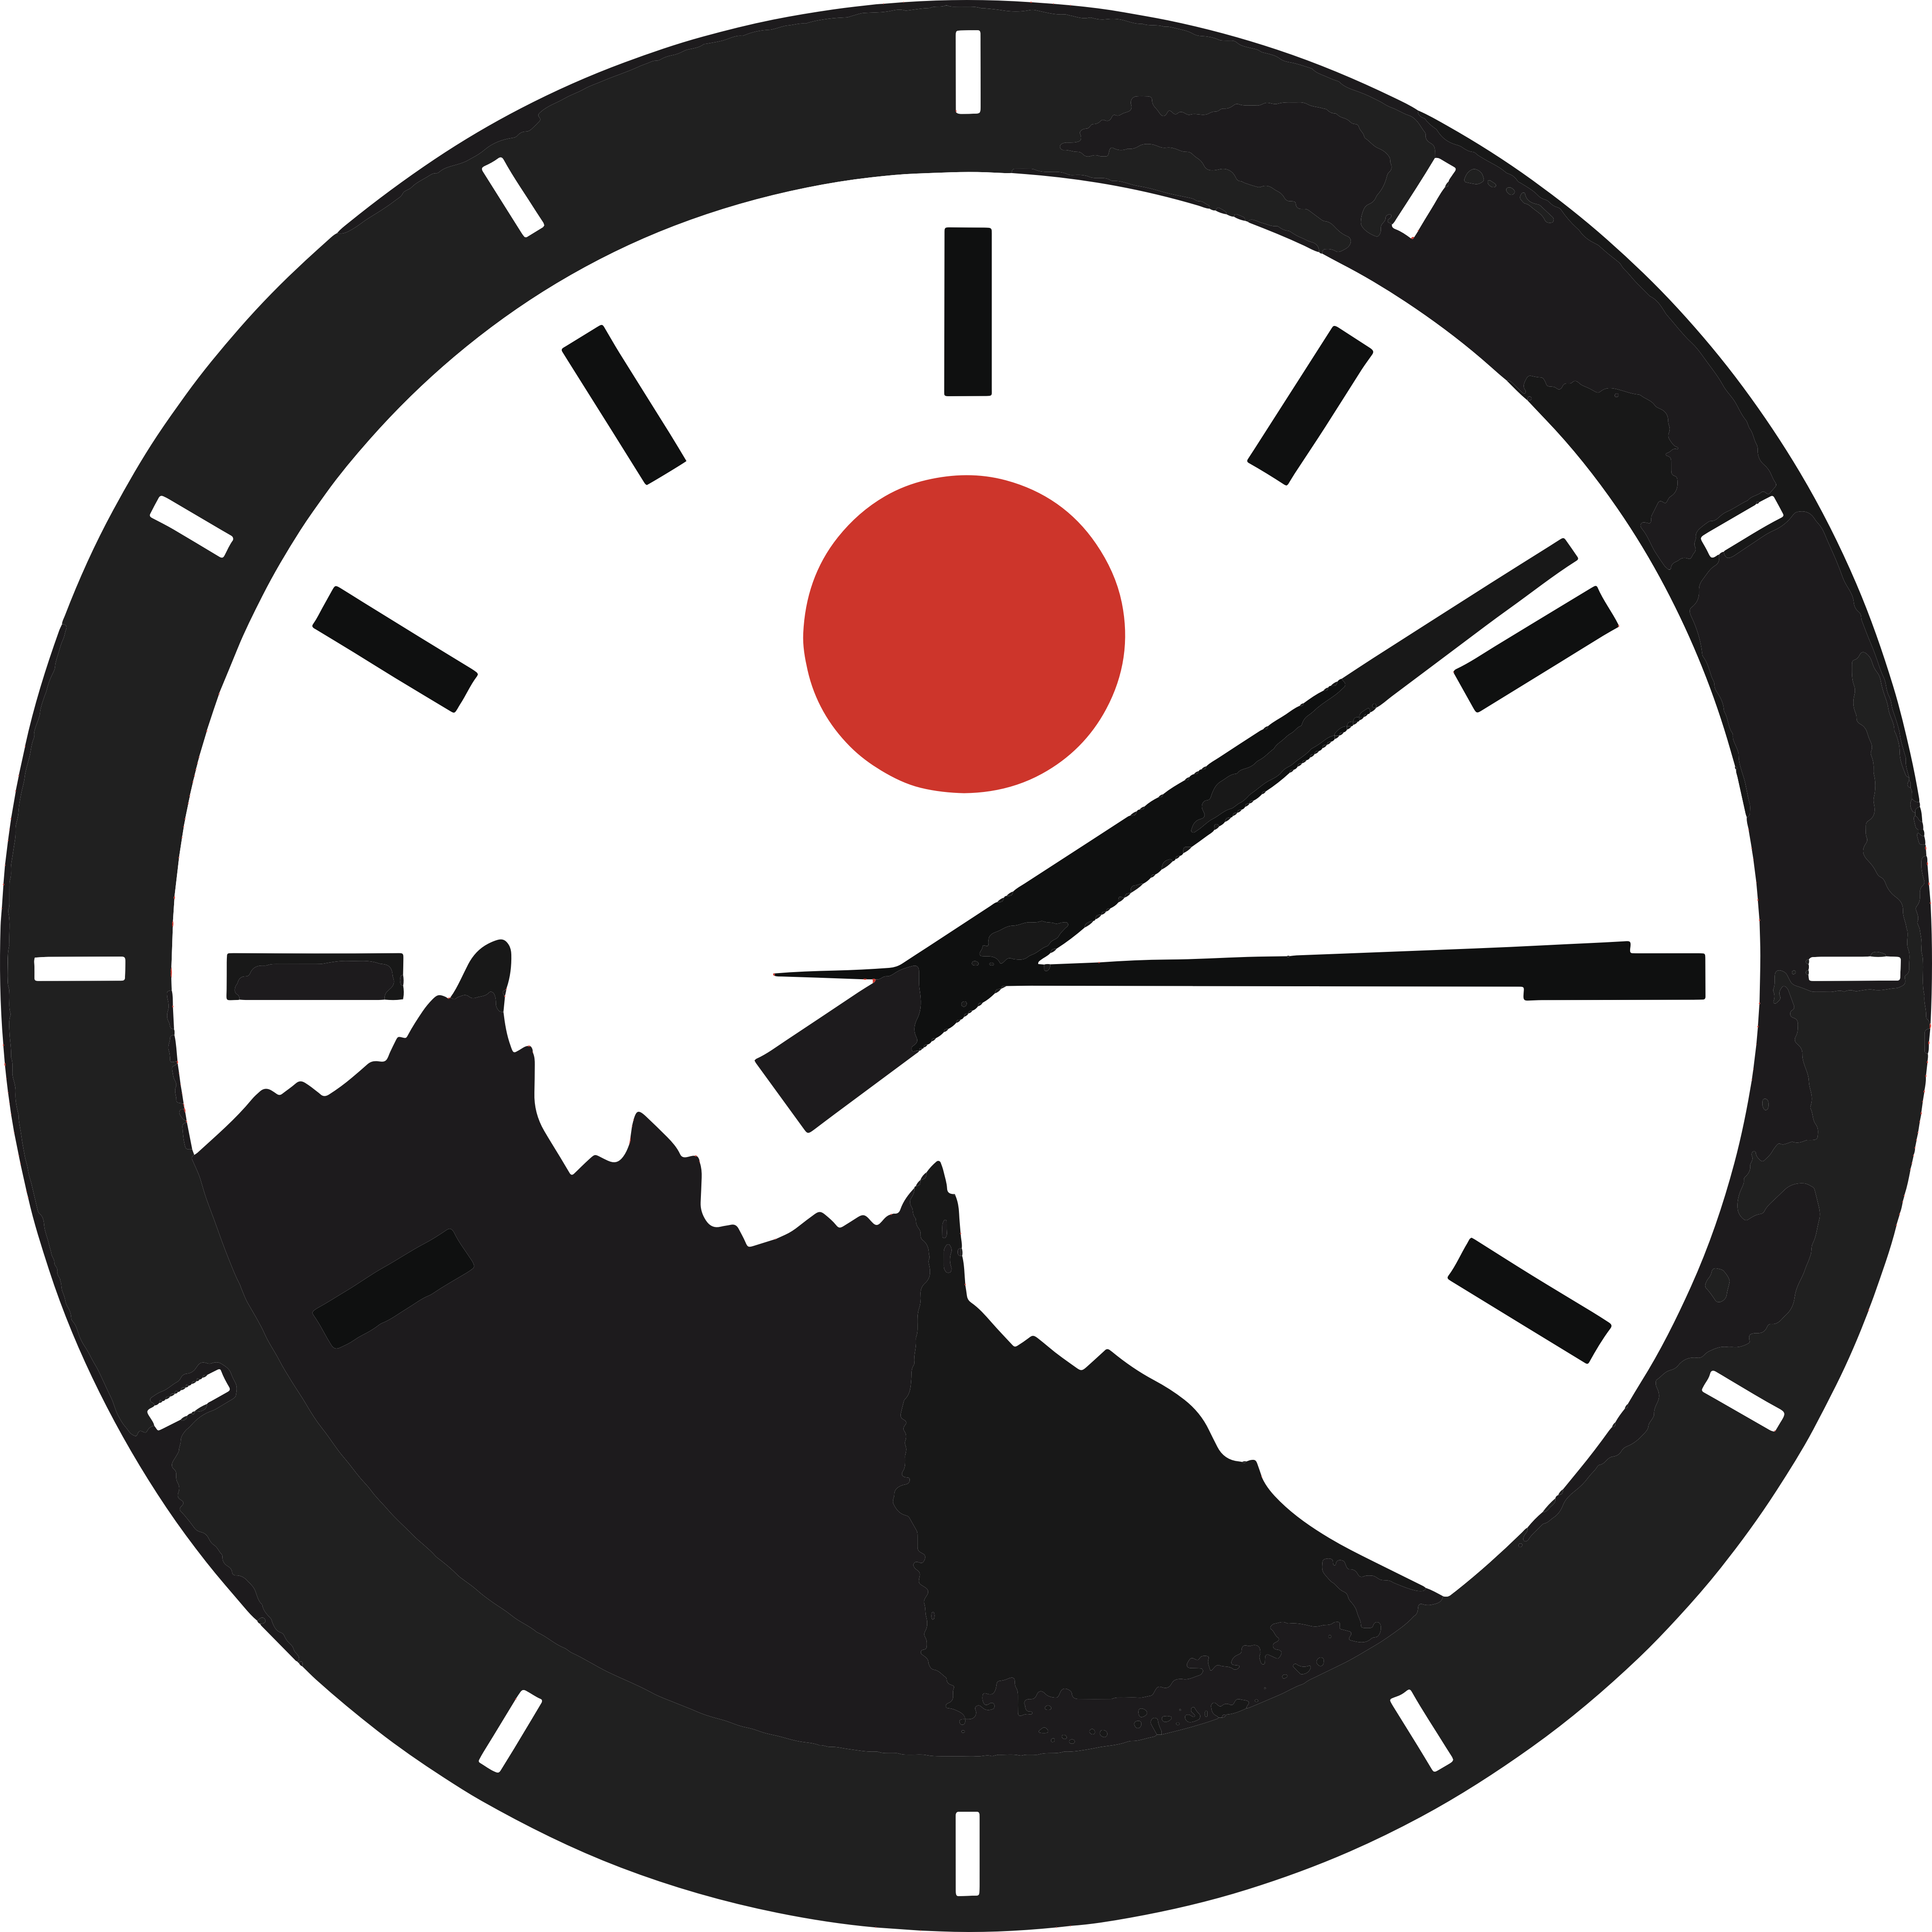 Logo of DateTime (DTT), a comprehensive Rust library dedicated to parsing, validating, manipulating, and formatting dates and times